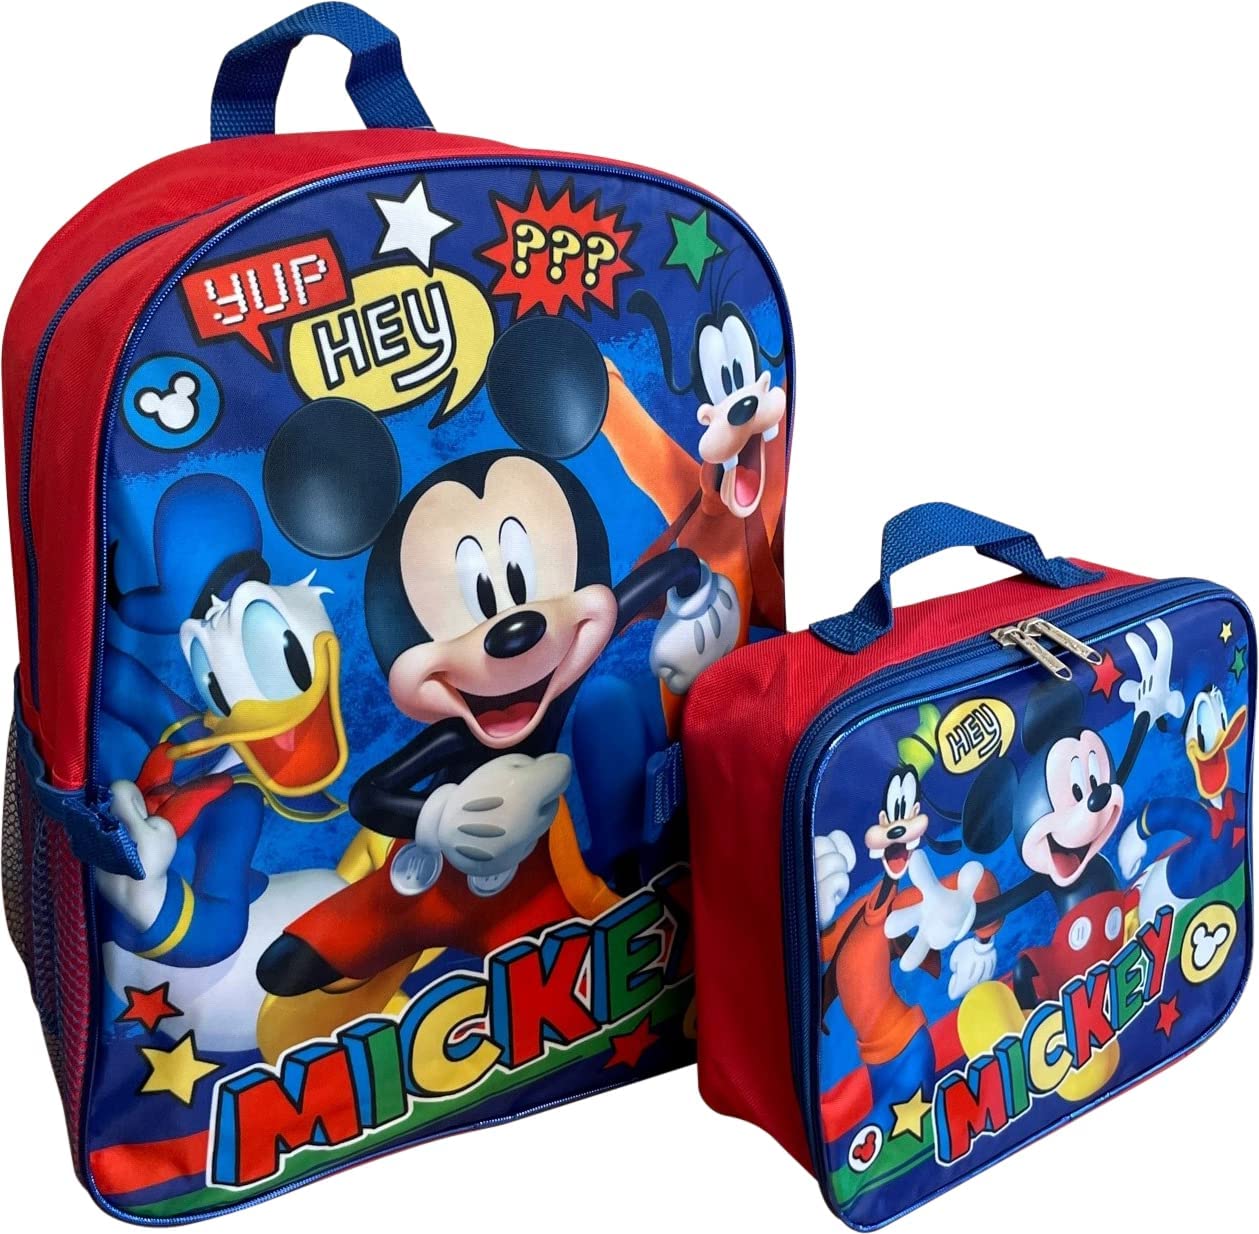 Disney Mickey Mouse Funhouse Backpack With Detachable Lunch Box